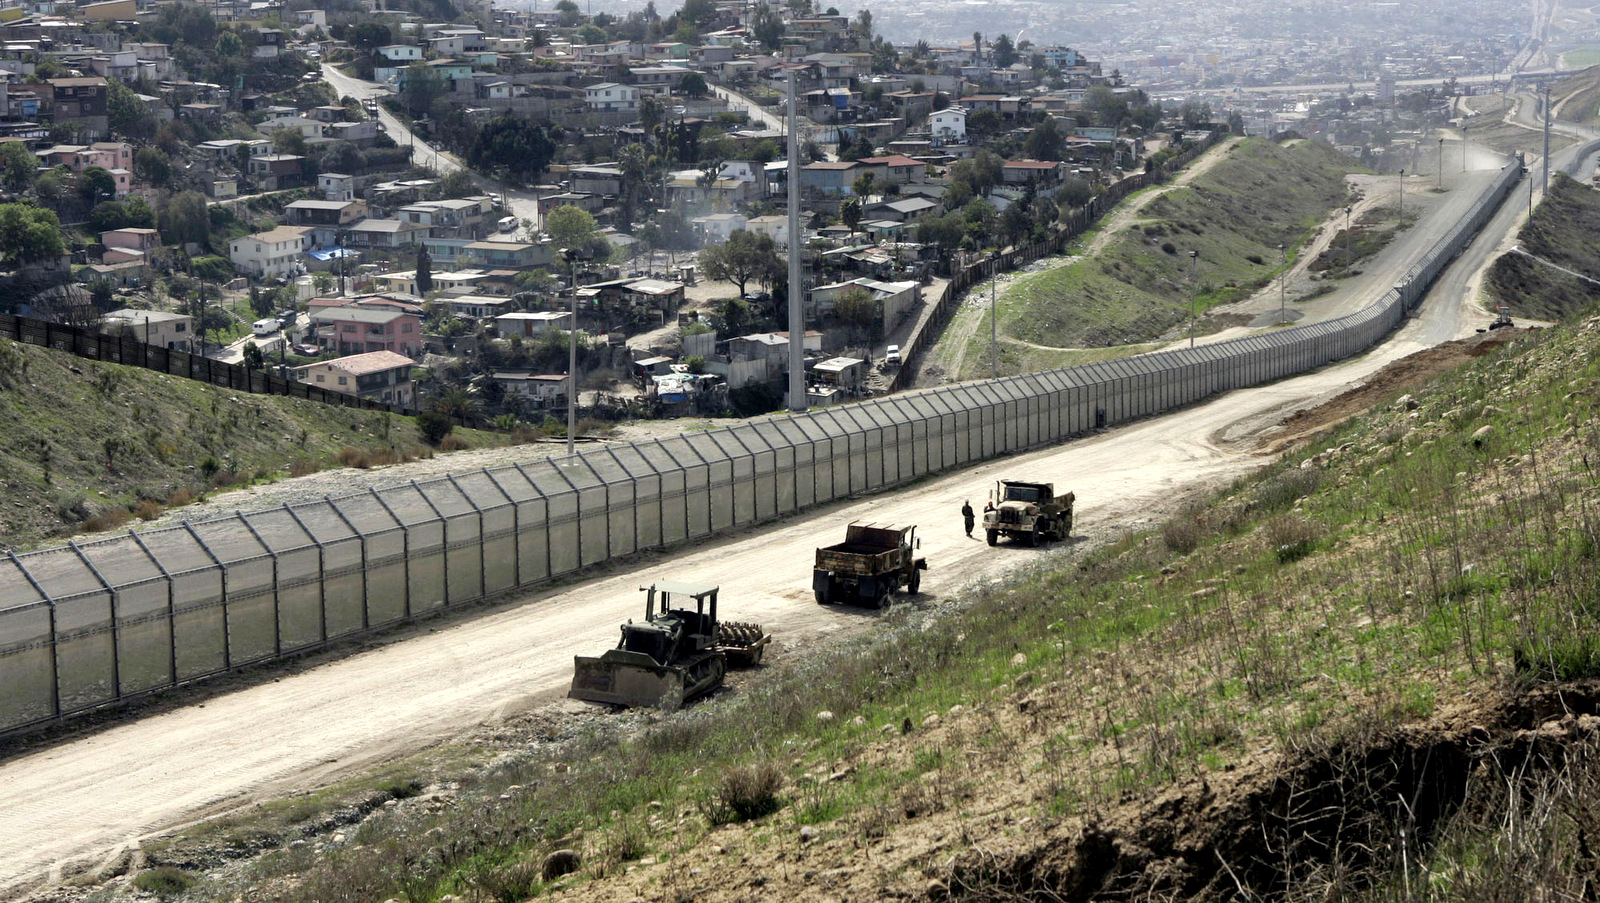 The U.S.-Mexico border fence stretches 14 miles inland separating San Diego and Tijuana, Mexico, in this March 27, 2006, file photo. The homes at left are in Tijuana. This section of became the western-most end of the fence when an additional 700 miles of non-contiguous fencing, was erected between California and Texas as a part of the Secure Fence Act. (AP/Lenny Ignelzi)